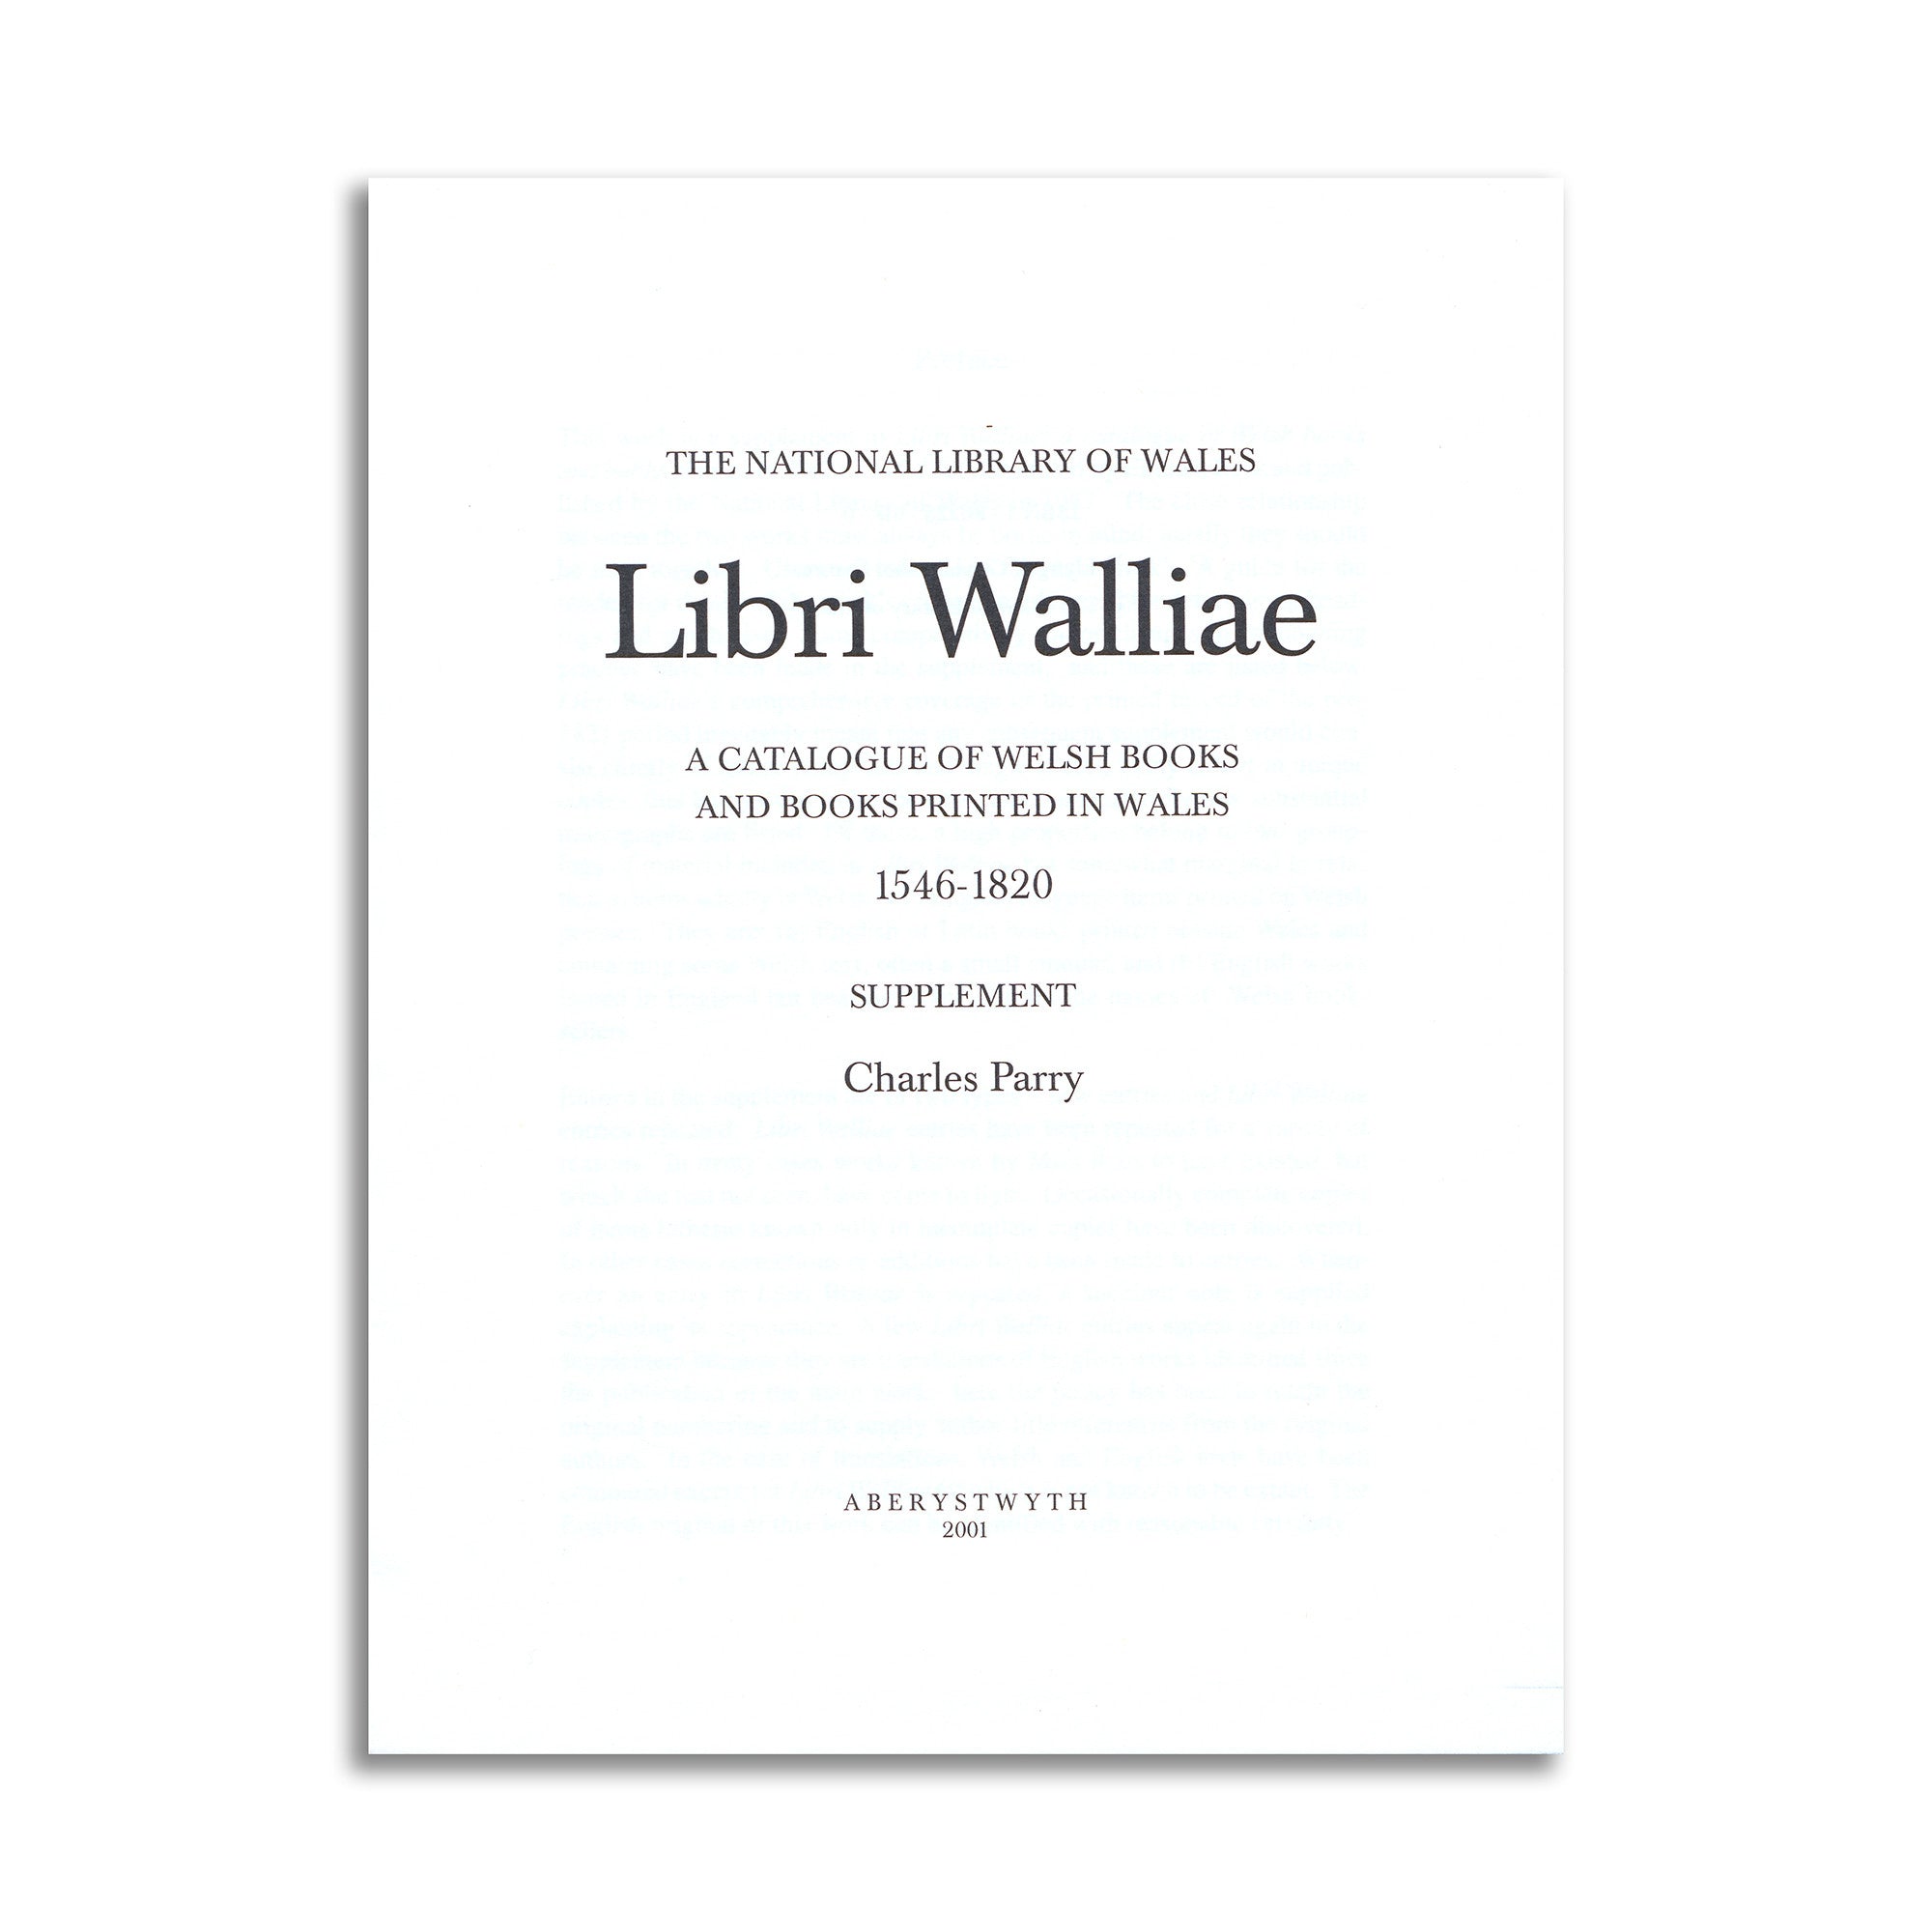 Libri Walliae - A catalogue of Welsh Books printed in Wales 1546-1820 (Supplement)